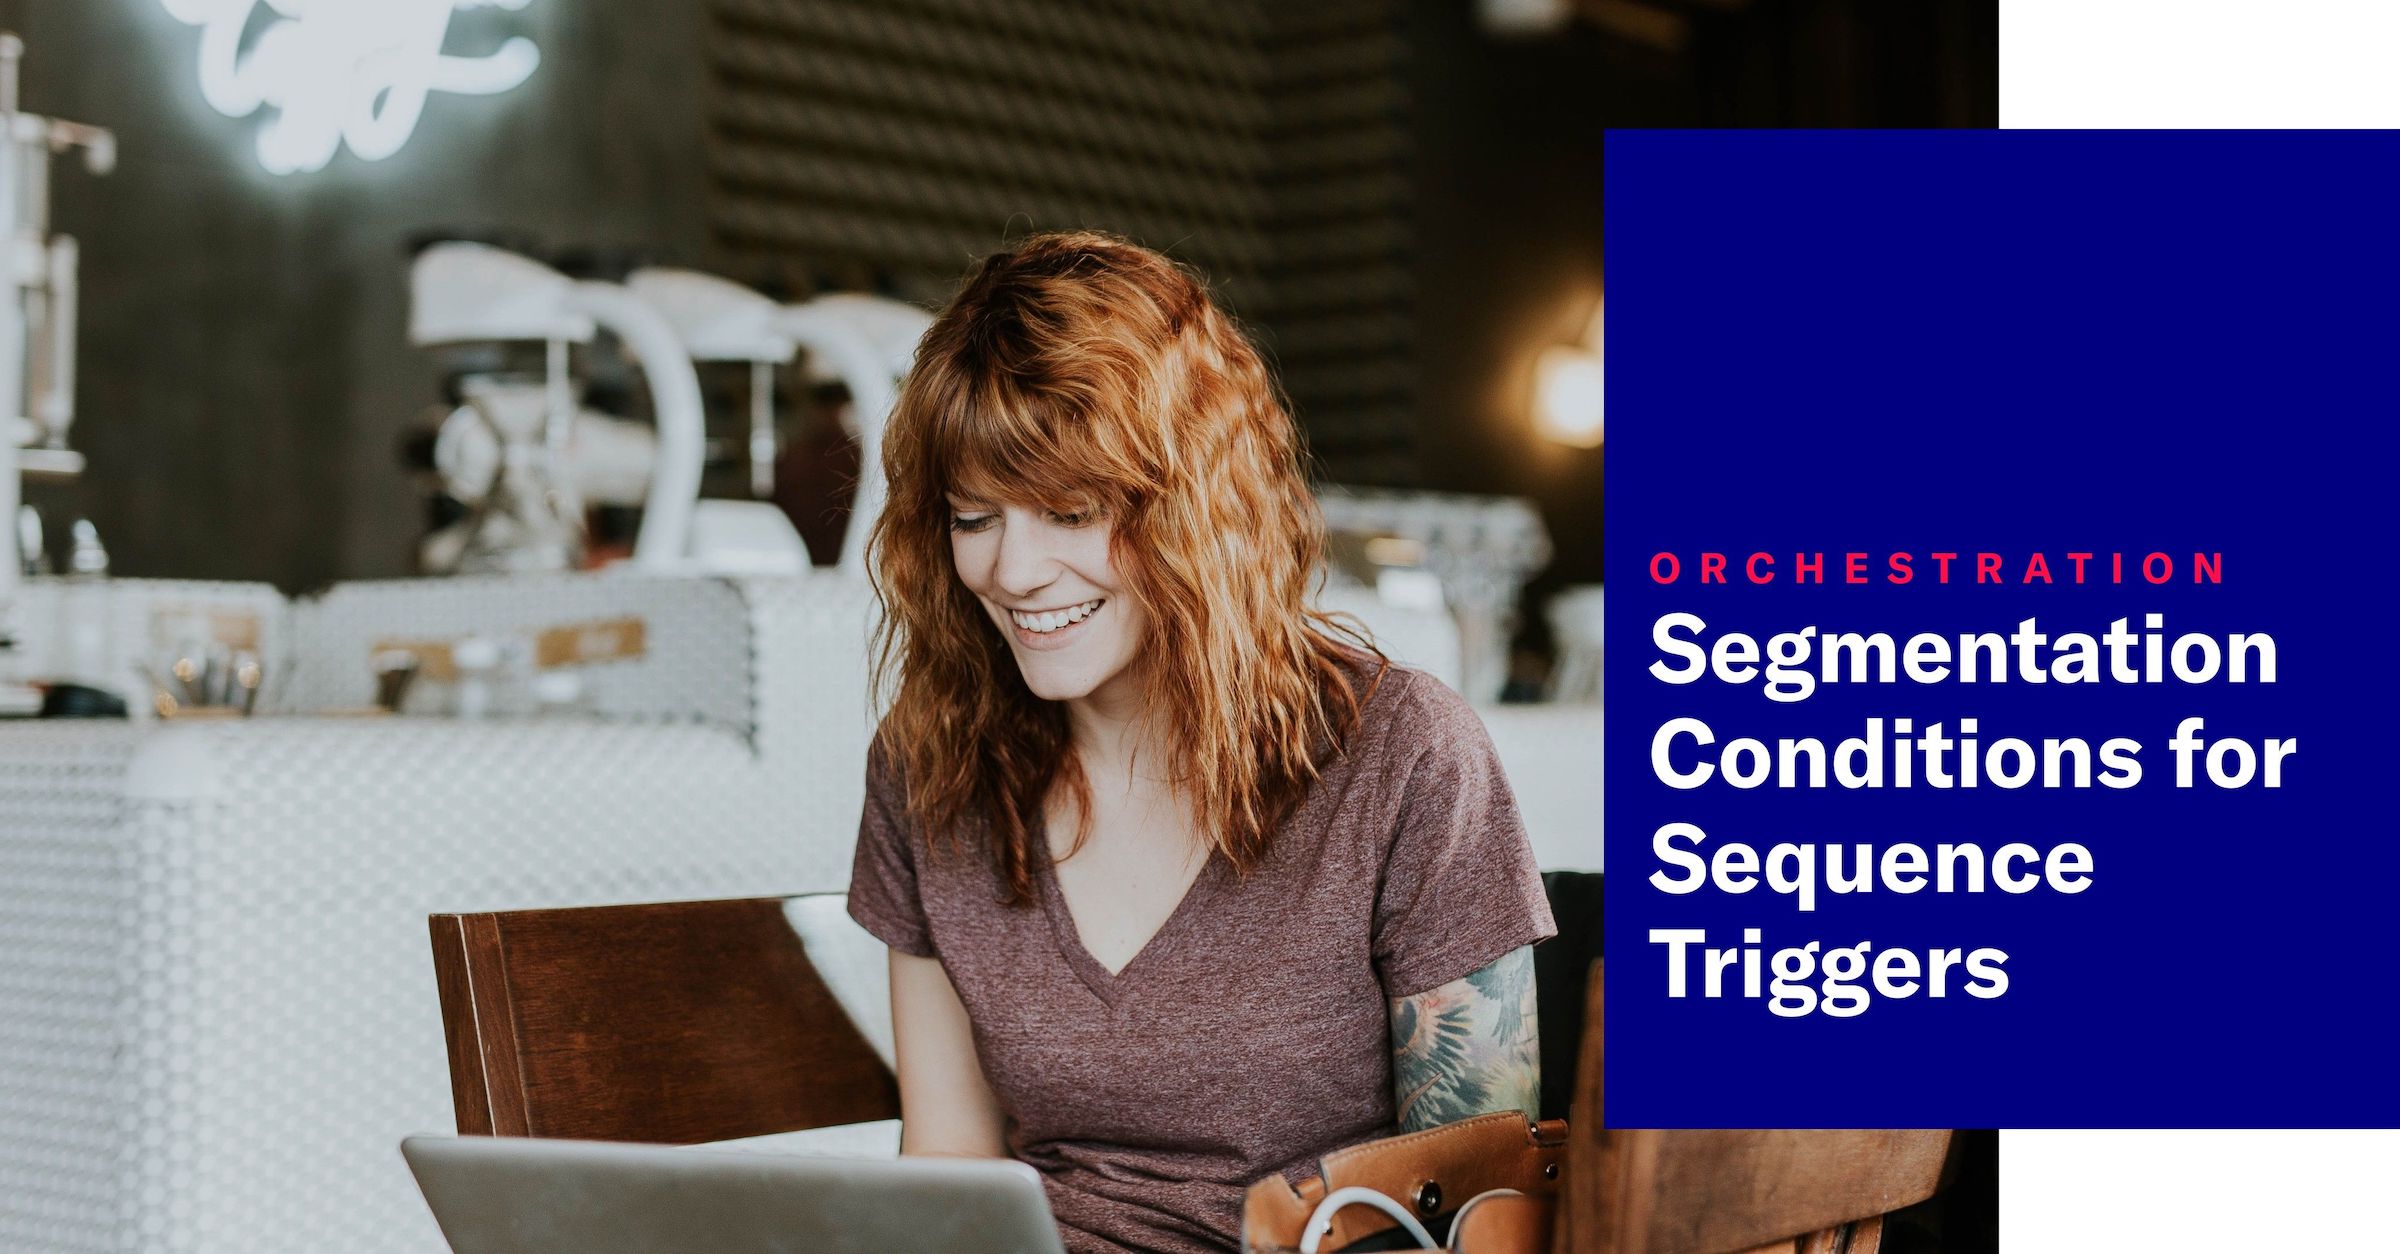 Segmentation Conditions for Sequence Triggers